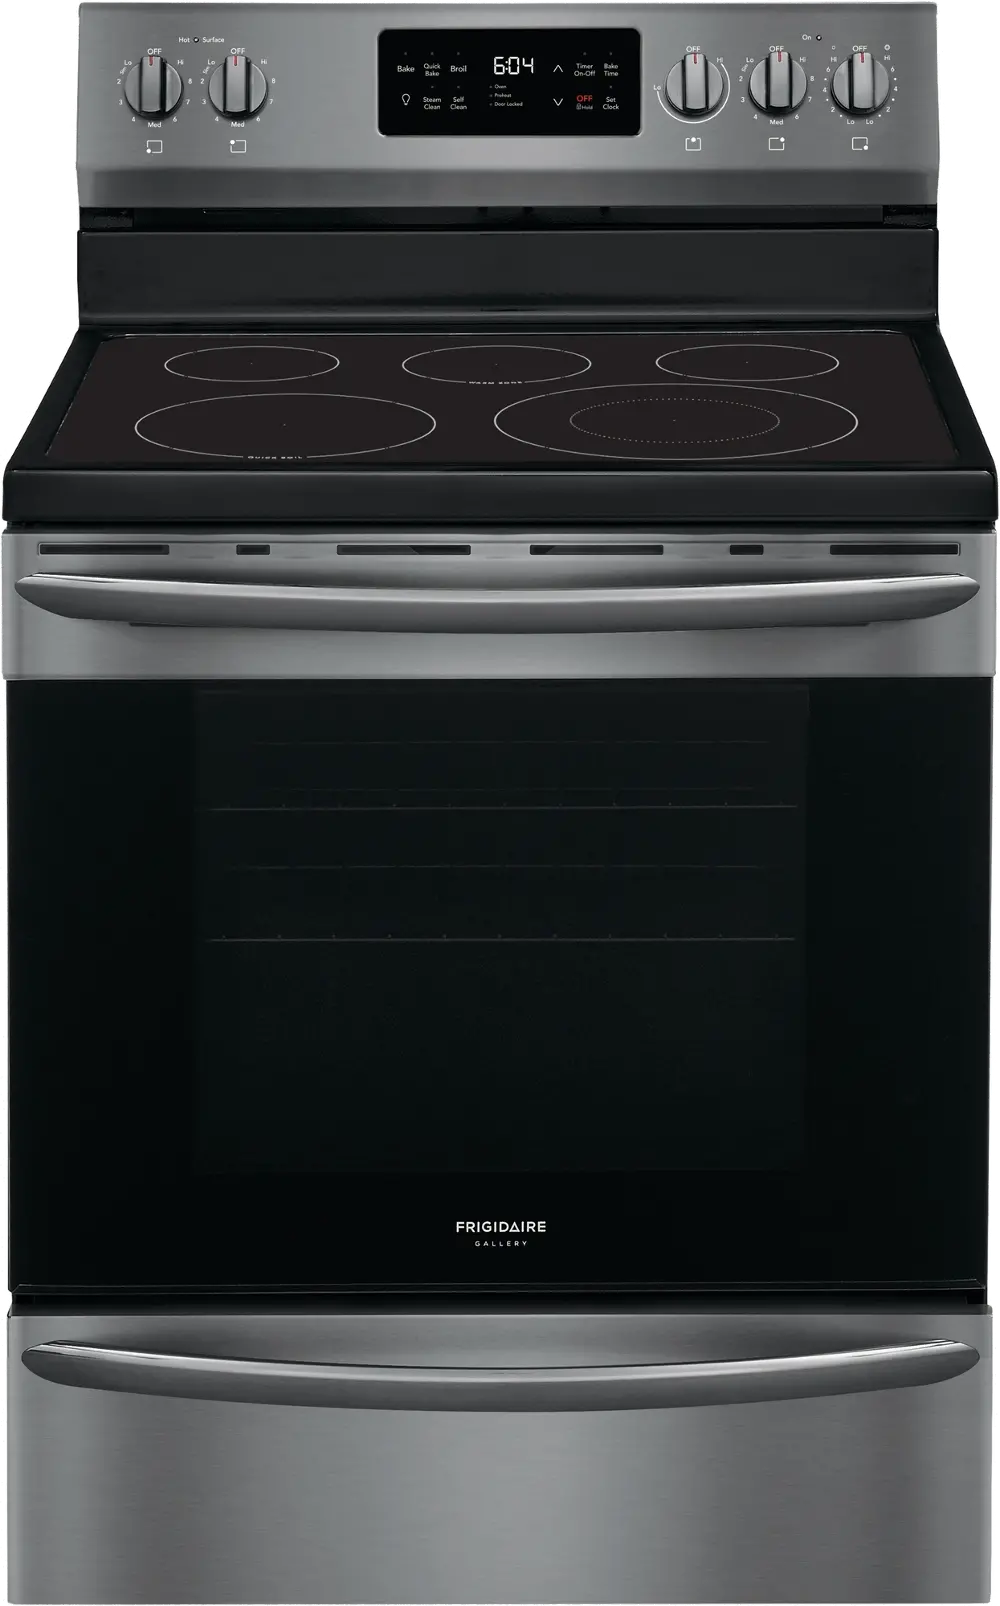 GCRE3038AD Frigidaire Gallery 5.4 cu ft Electric Range - Black Stainless Steel-1